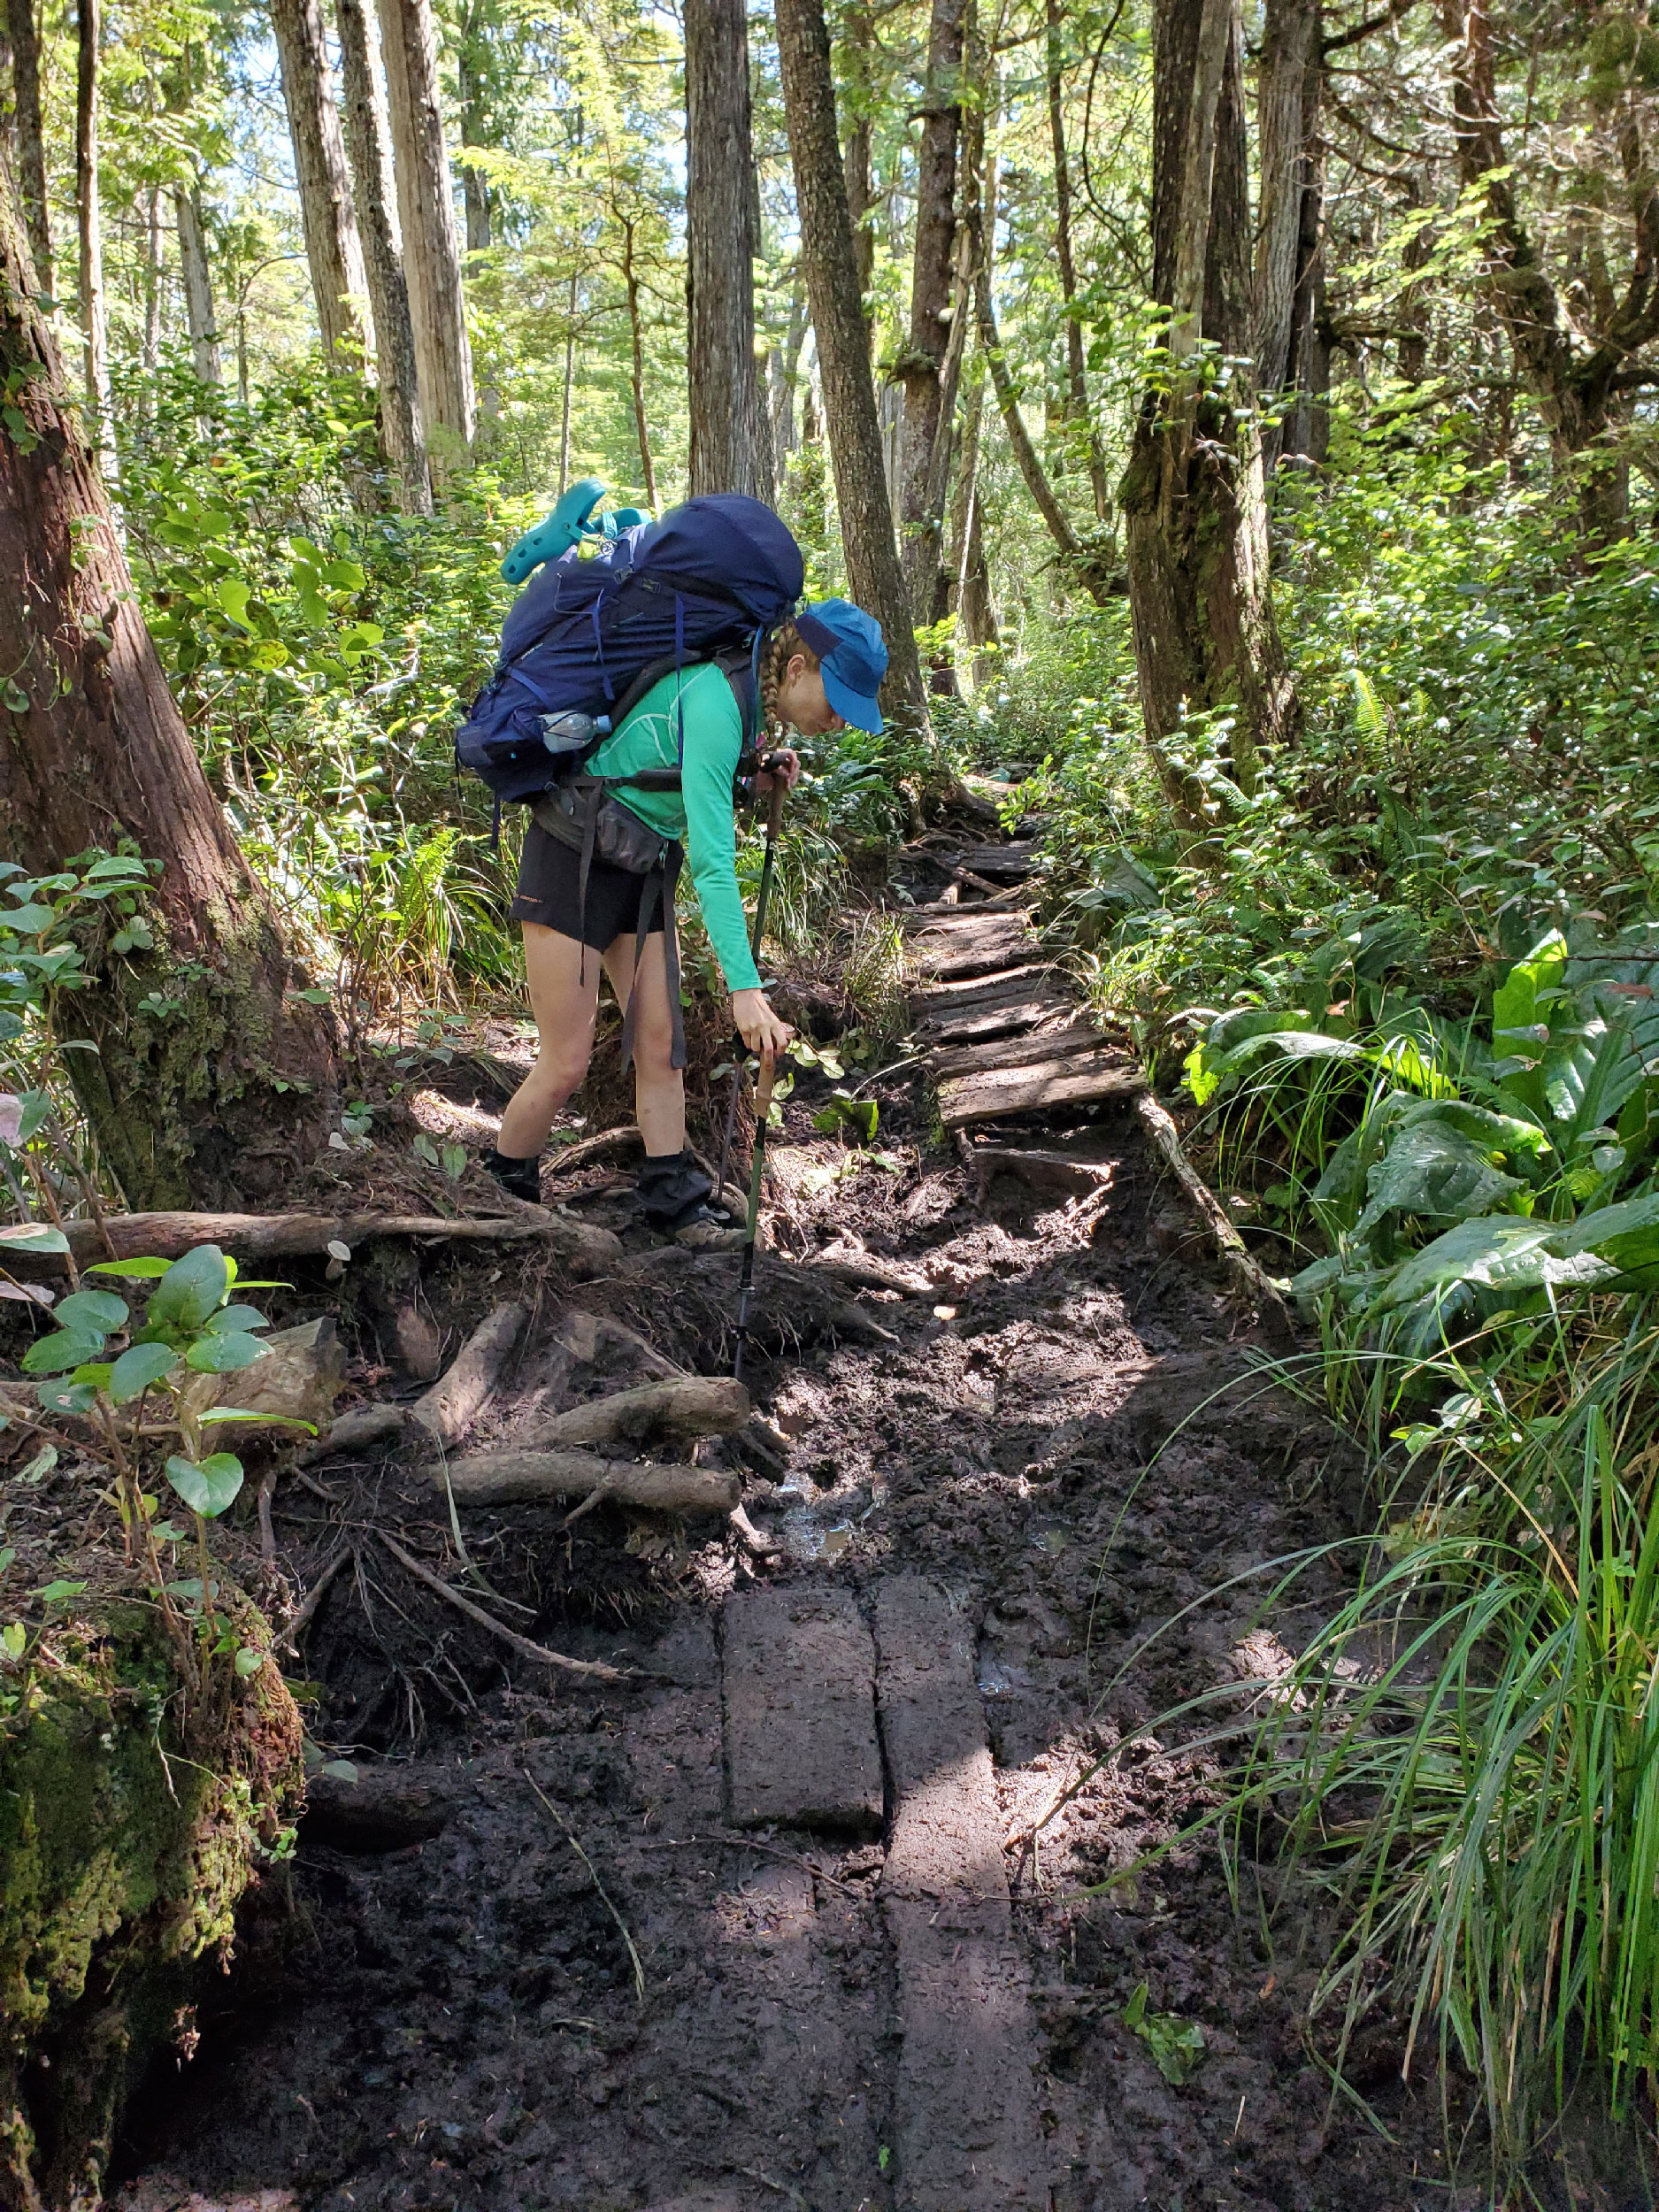 A hiker navigates the deep mud in an area where the boardwalk has long since ceased to function as a boardwalk